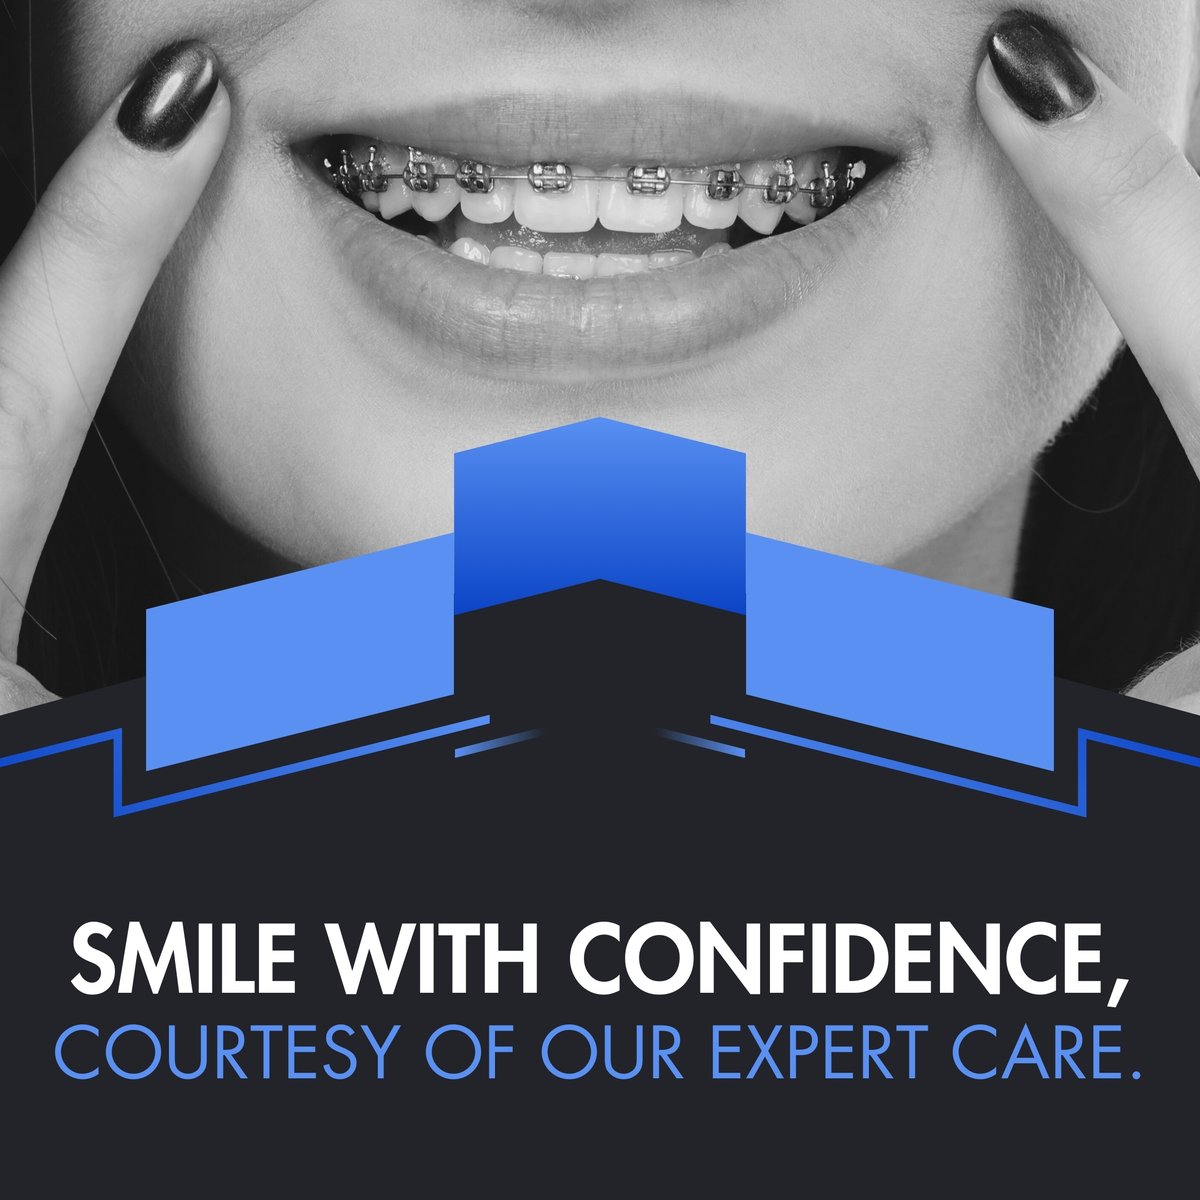 Confidence in every smile, courtesy of our expert care. Let your radiant grin shine!  😁✨ #SmileWithConfidence #ExpertOrthodonticCare #RadiantSmile #HealthySmiles #Happiness #DentalHealth #Orthodontics #SmileTransformation  #Invisalign #Braces #DenverOrthodontist #FreeConsult...